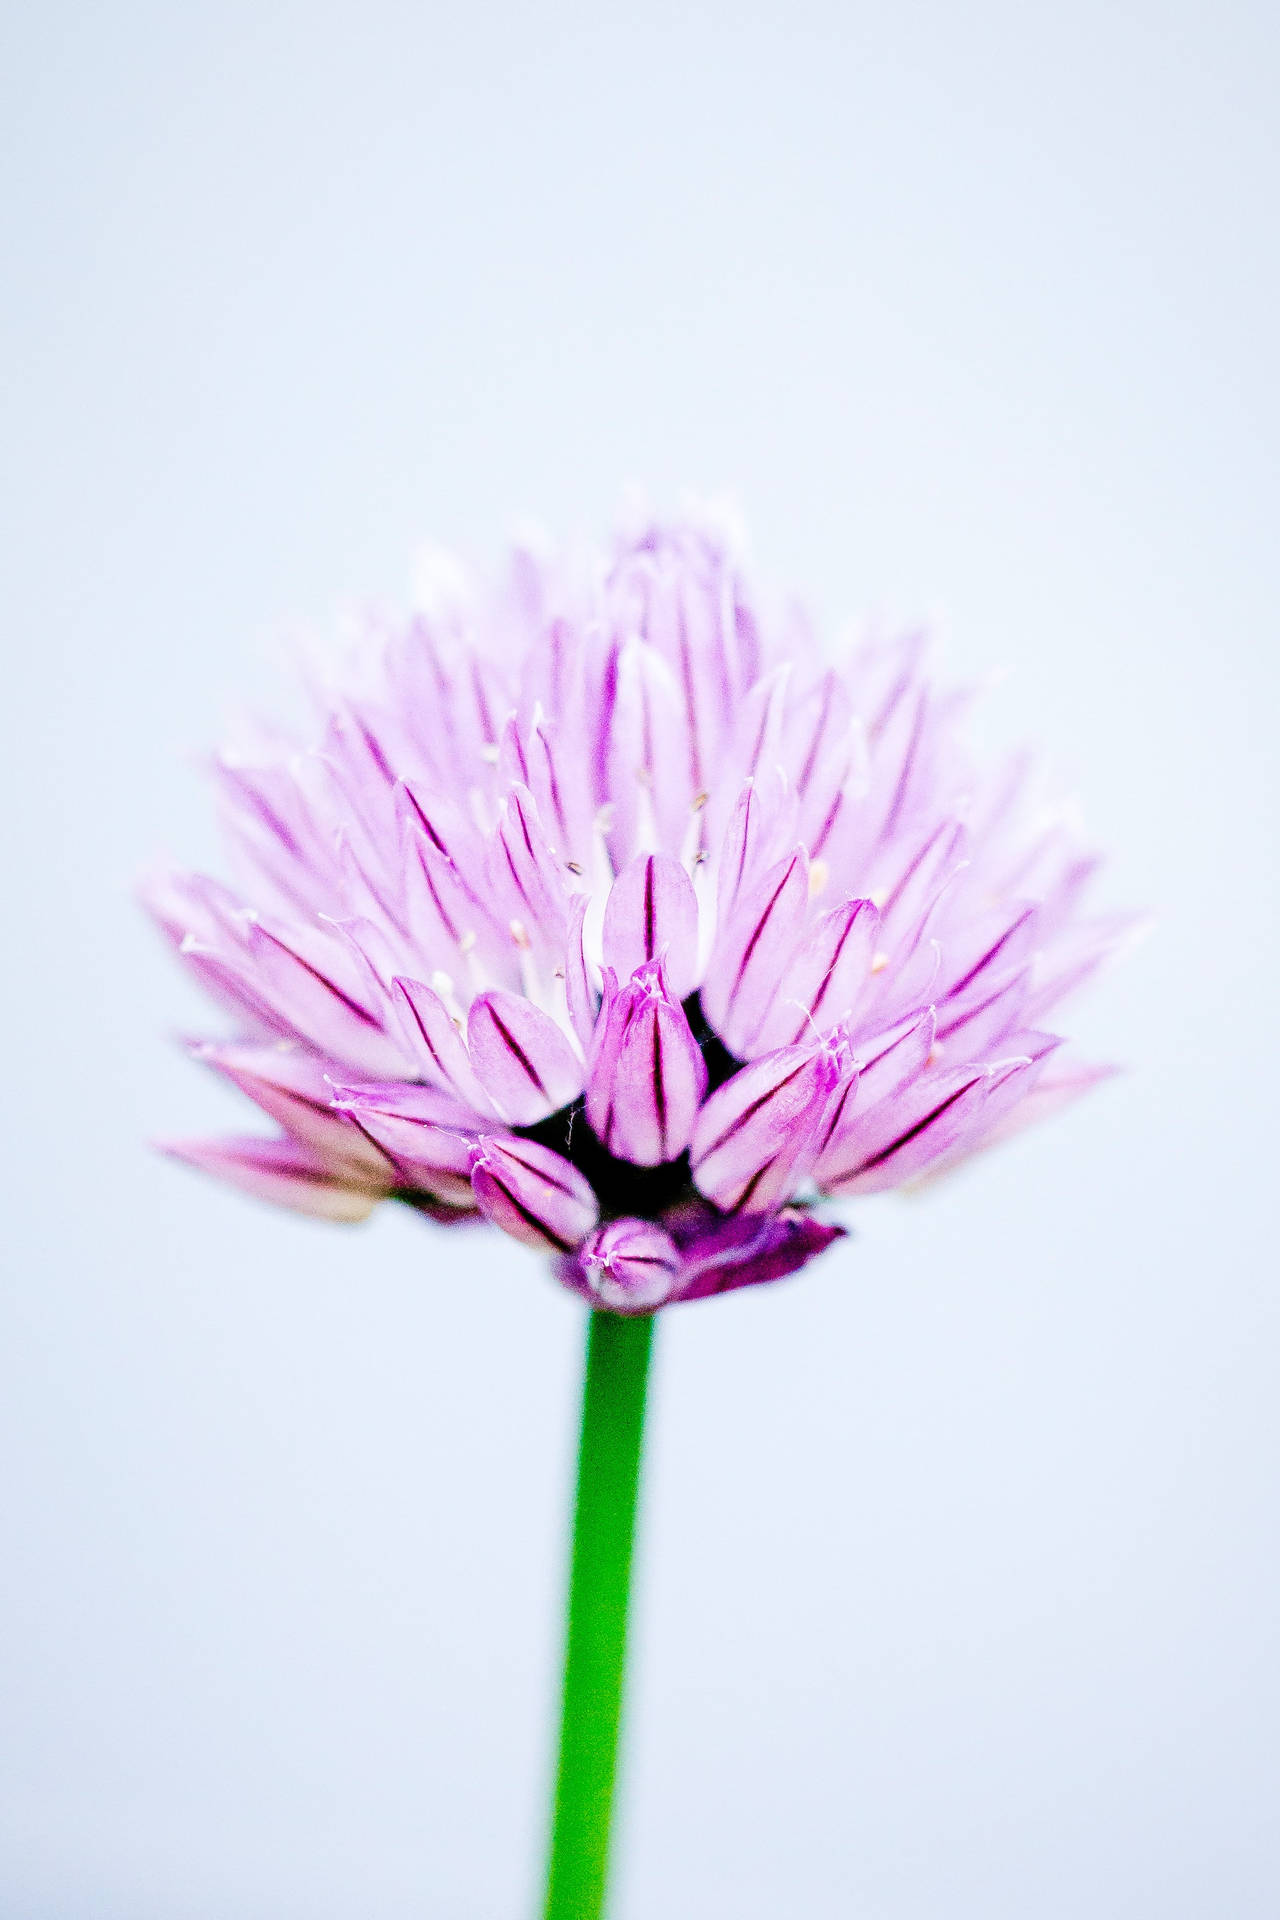 Chives Flower Android Background